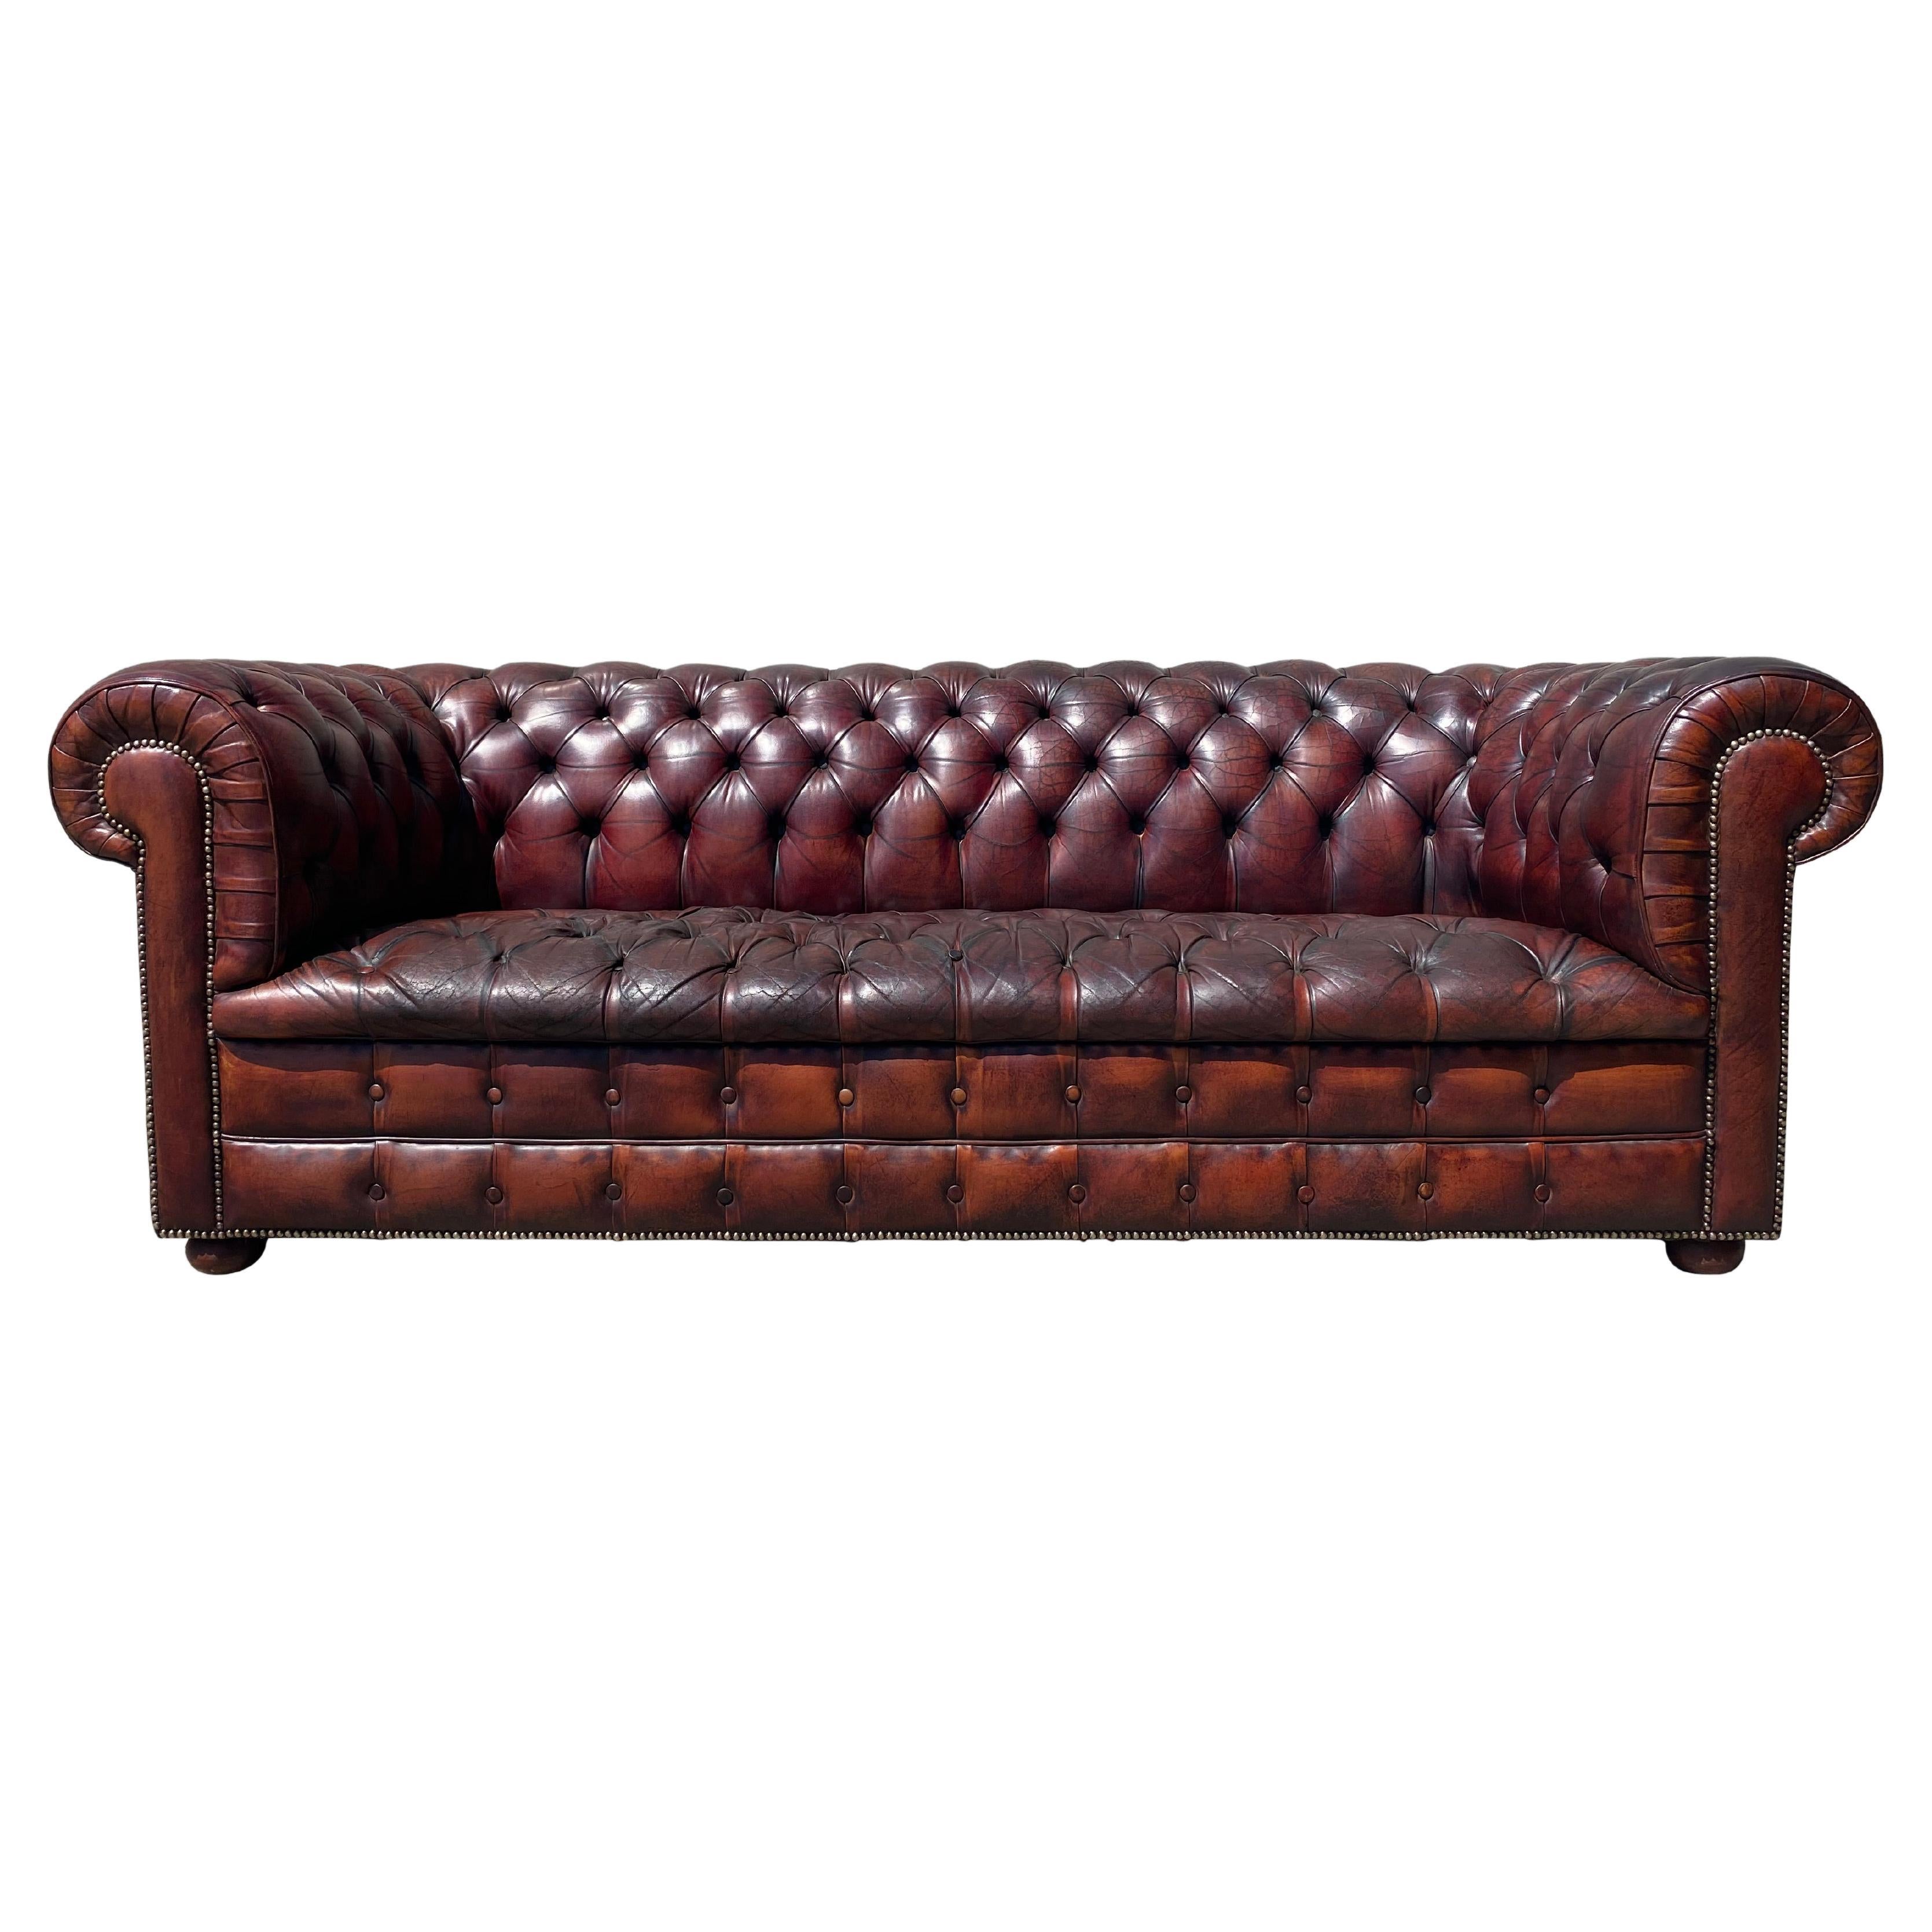 Early 20th Century Burgundy Colour Leather Three Seater Chesterfield For Sale